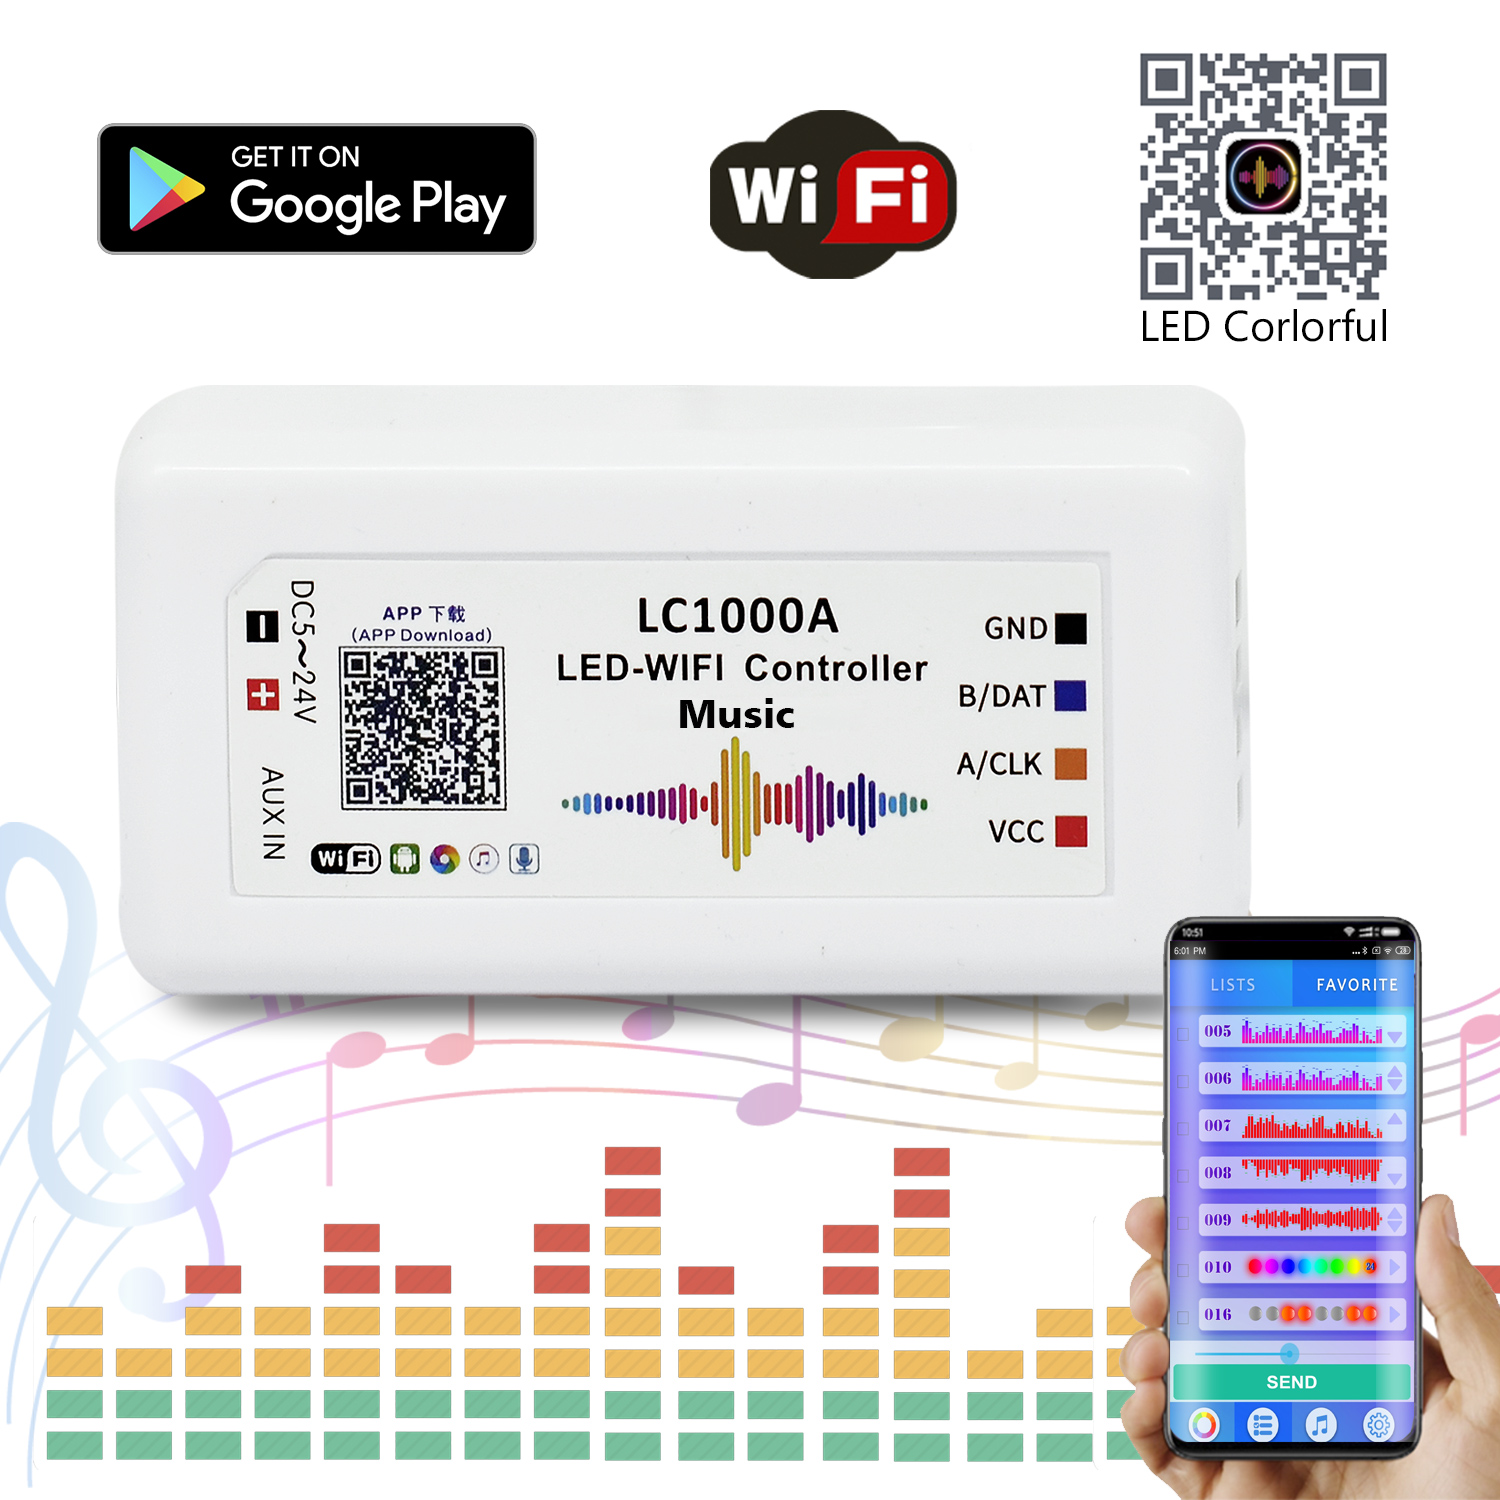 DC7-24V, One Channel, 2019 Newest LED WIFI Music Spectrum Android Controller, For DMX512, LPD6803,WS2811,WS2812B, WS2801 Addressable LED Strip Lights, APP Surport Input Content, Google Play Download